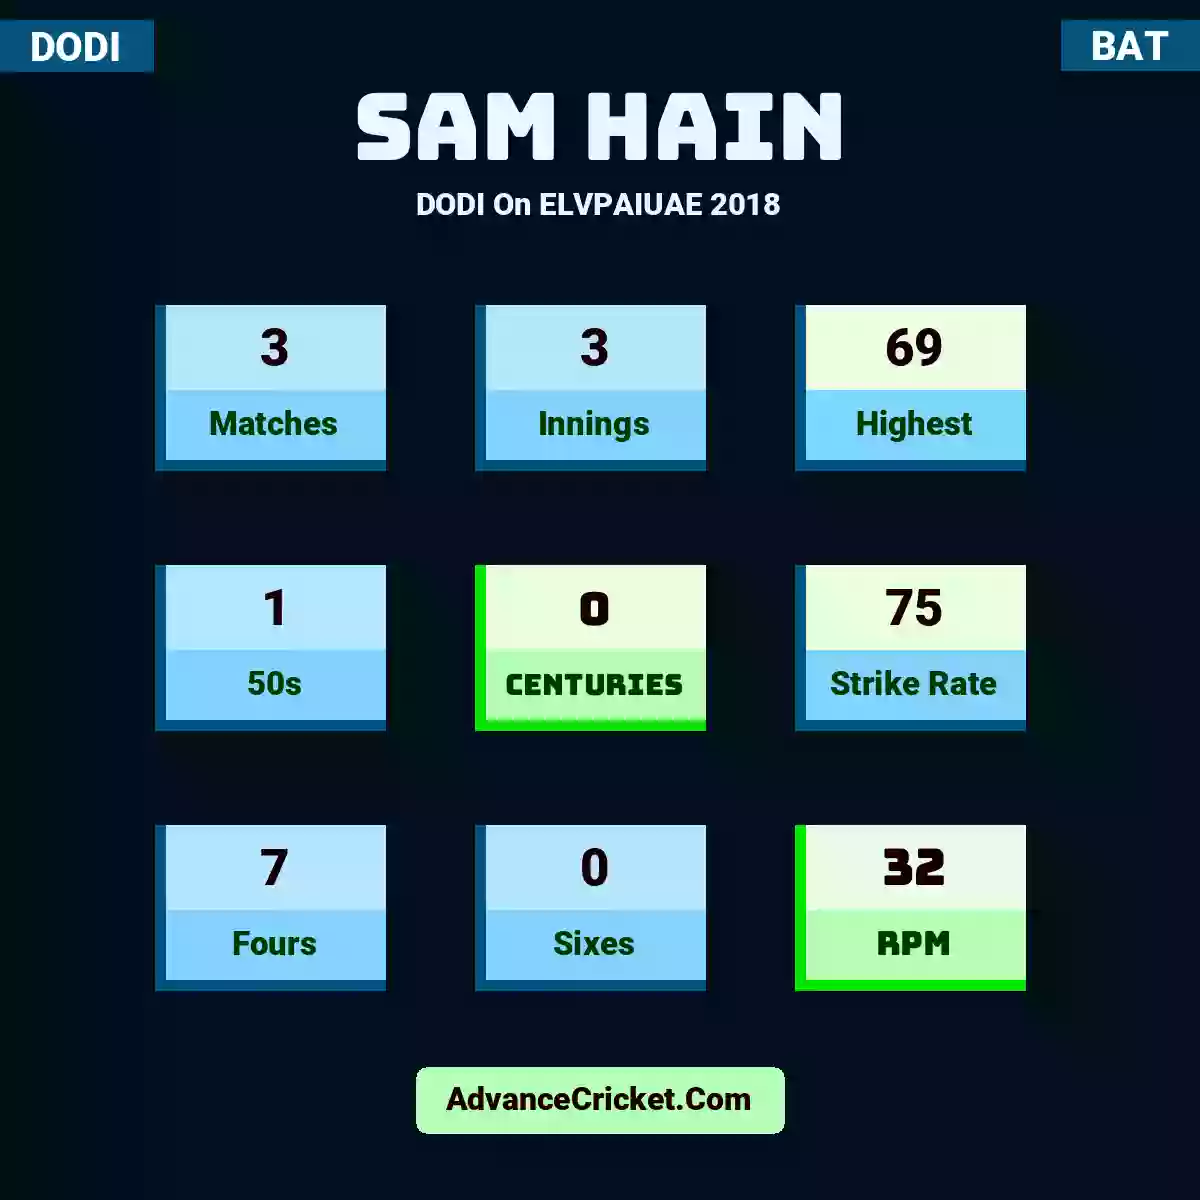 Sam Hain DODI  On ELVPAIUAE 2018, Sam Hain played 3 matches, scored 69 runs as highest, 1 half-centuries, and 0 centuries, with a strike rate of 75. S.Hain hit 7 fours and 0 sixes, with an RPM of 32.